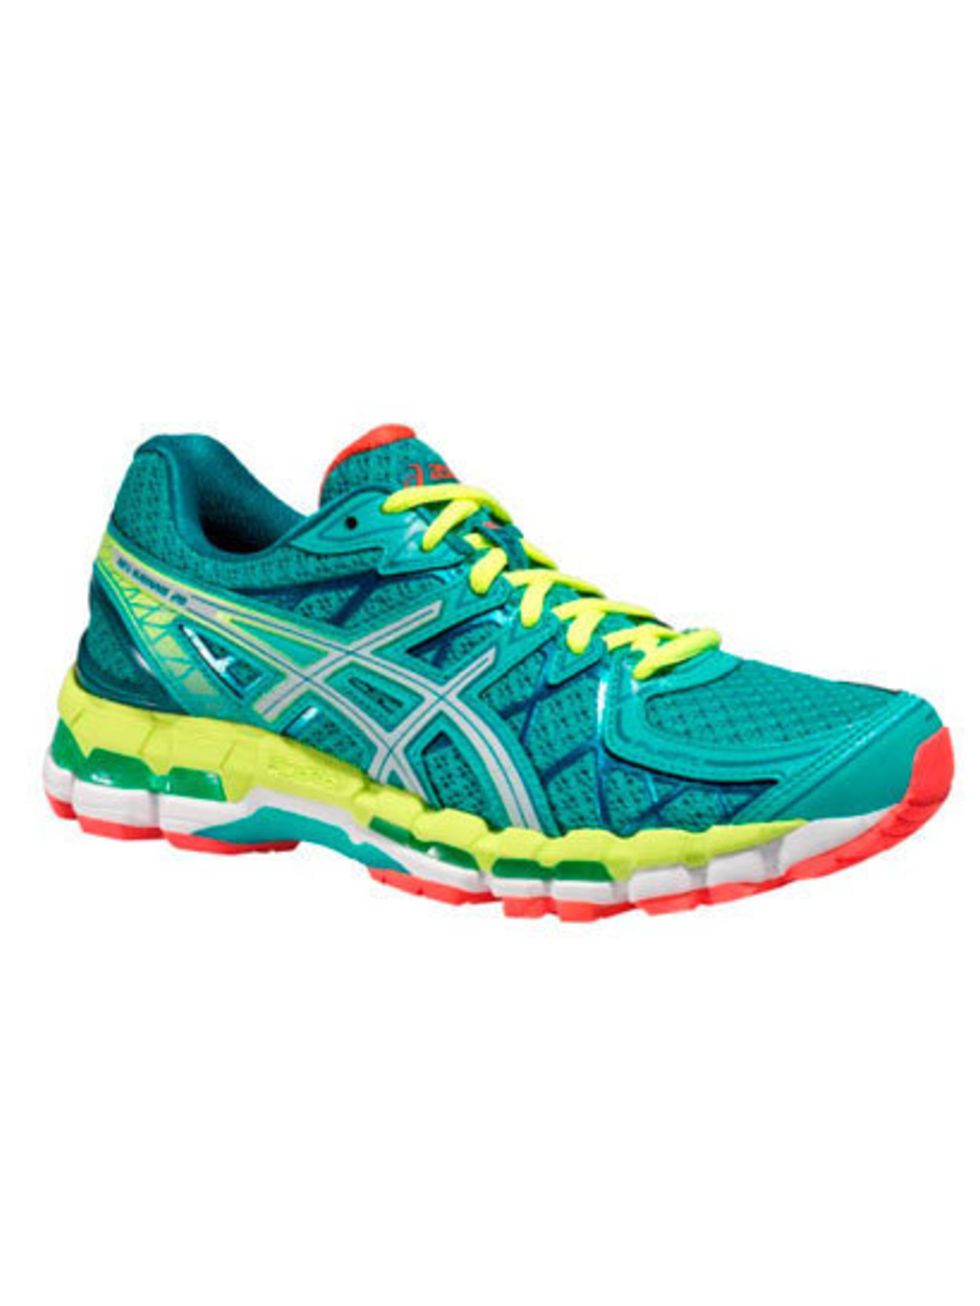 <p><a href="http://www.asics.co.uk/Shop/Women/GEL-KAYANO-20-LITE-SHOW/p/0010213147.7093">Asics Gel-Kayano 20, £140</a></p><p>These lightweight trainers look awesome, but are functional too. With cushioning, built-in support and 360 degree reflective detai